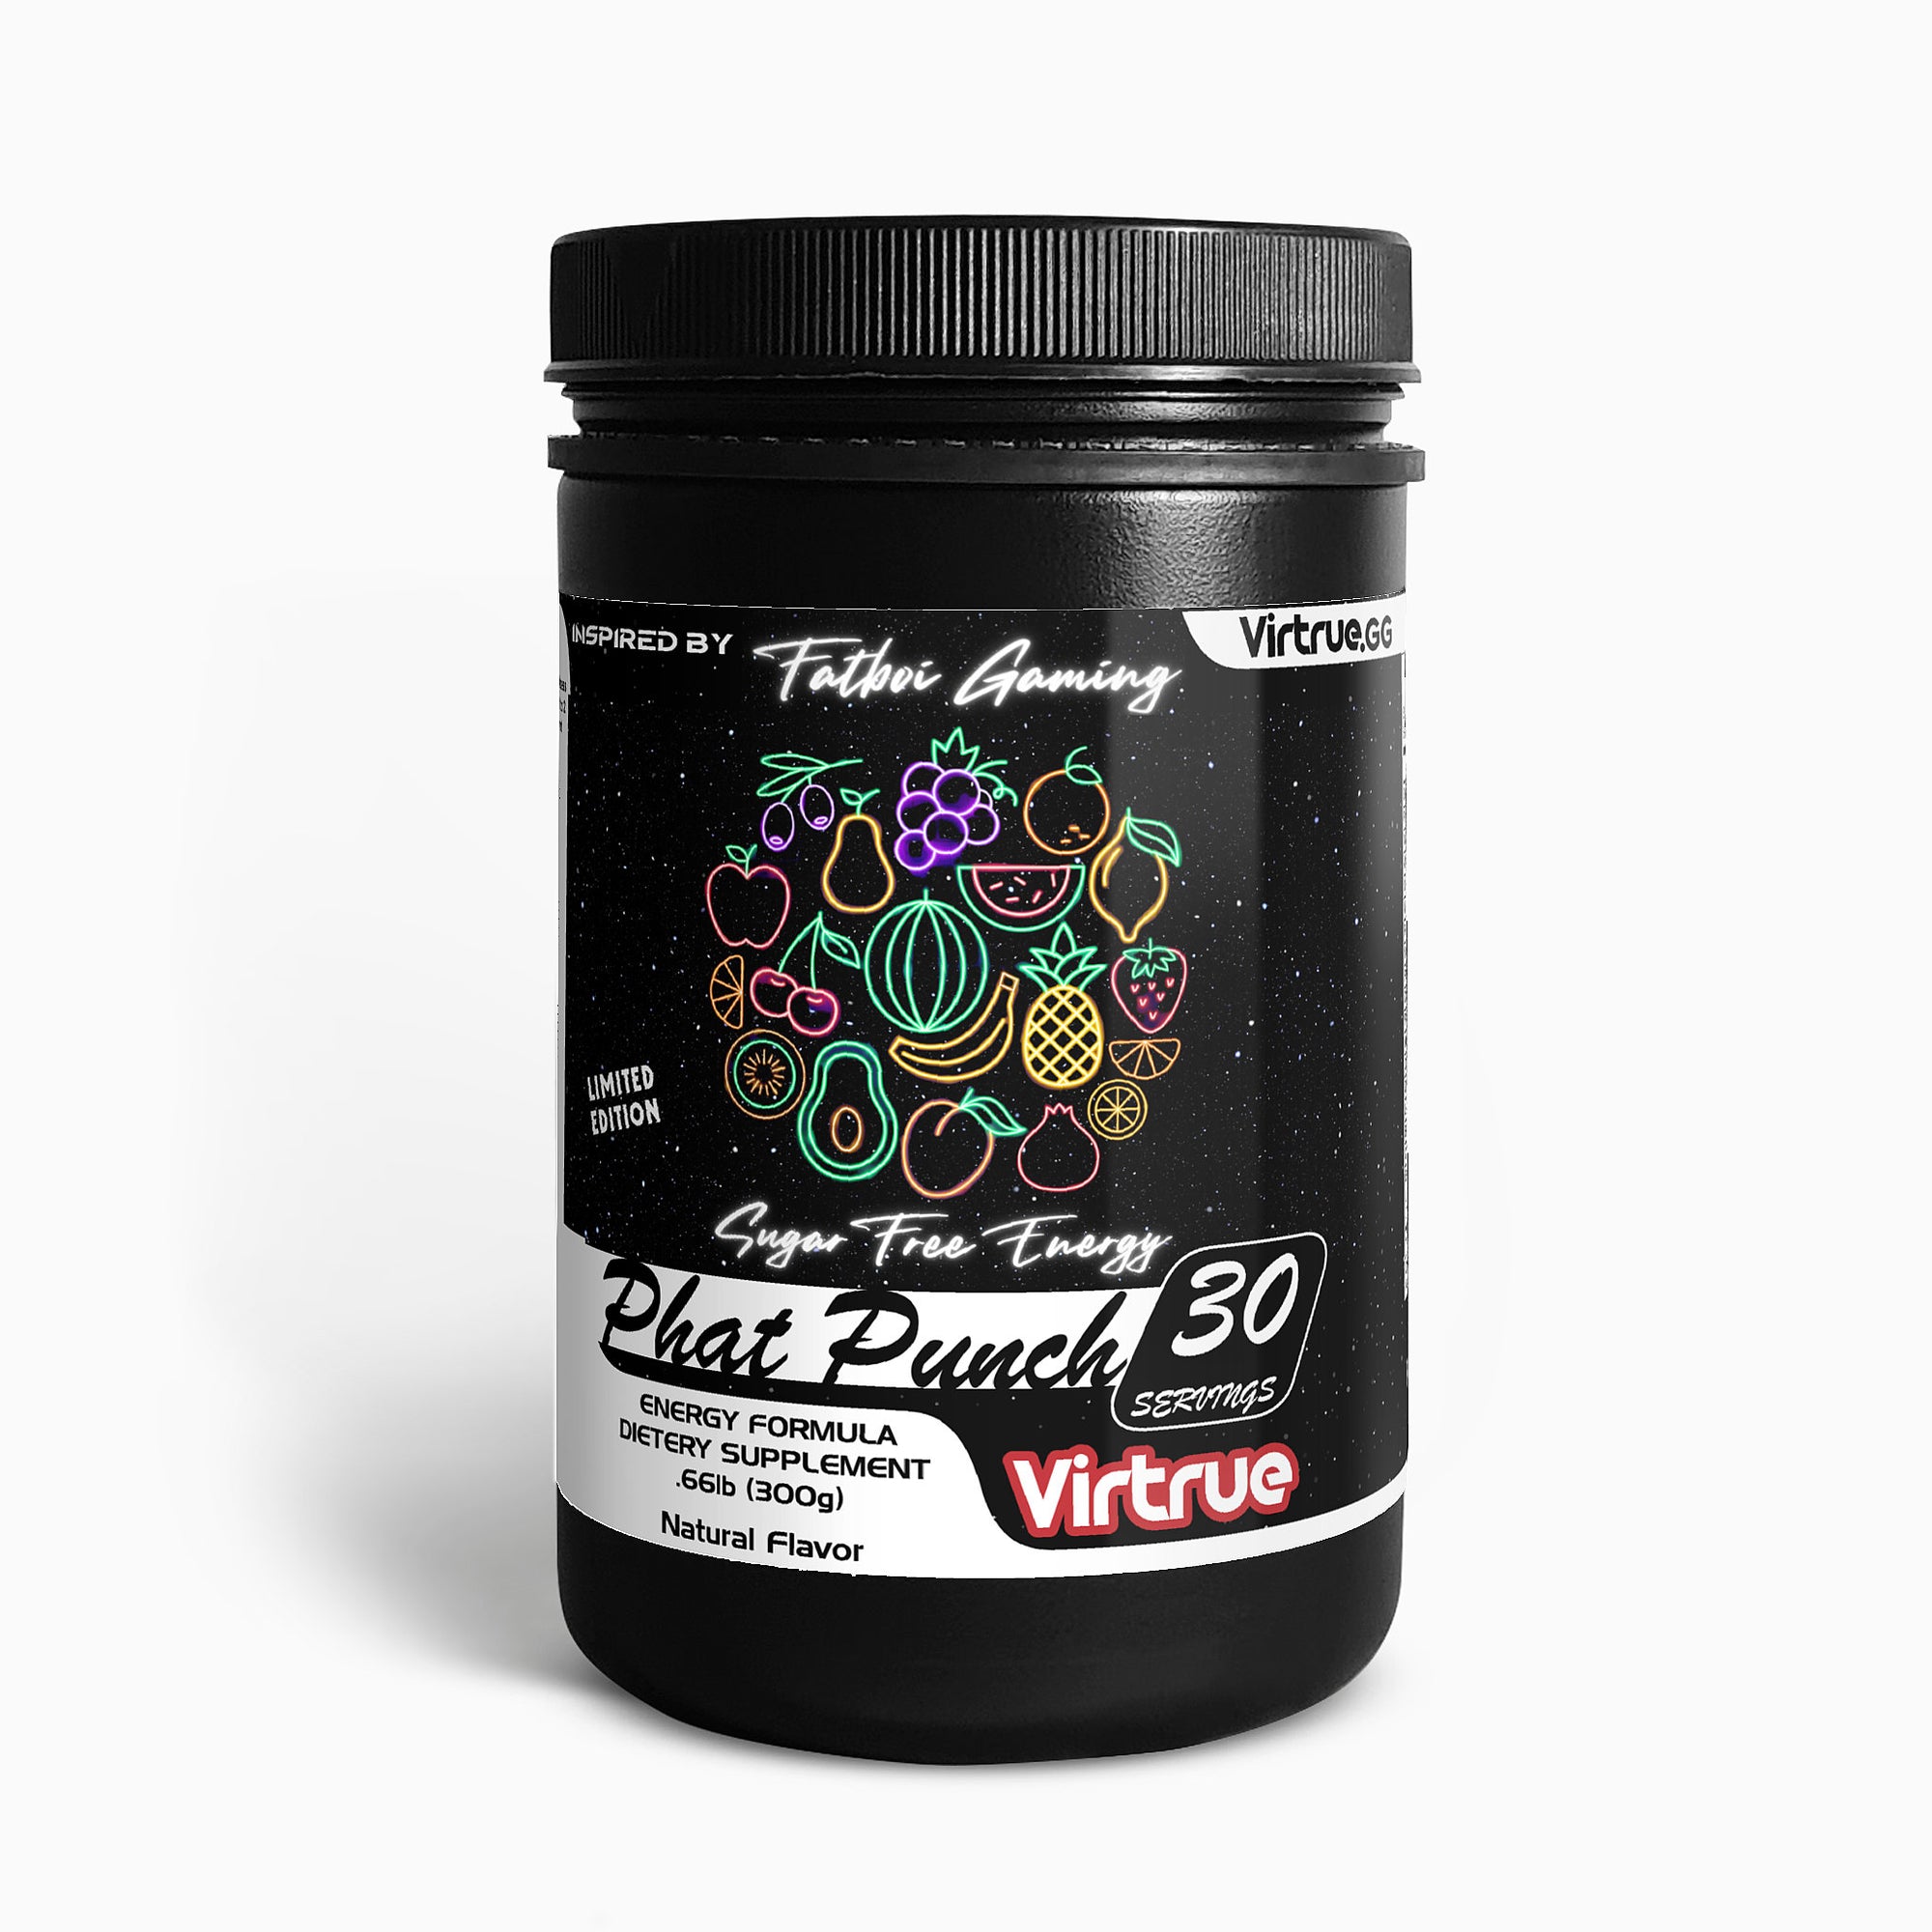 Phat Punch Energy Formula - Inspired by Fatboi Gaming